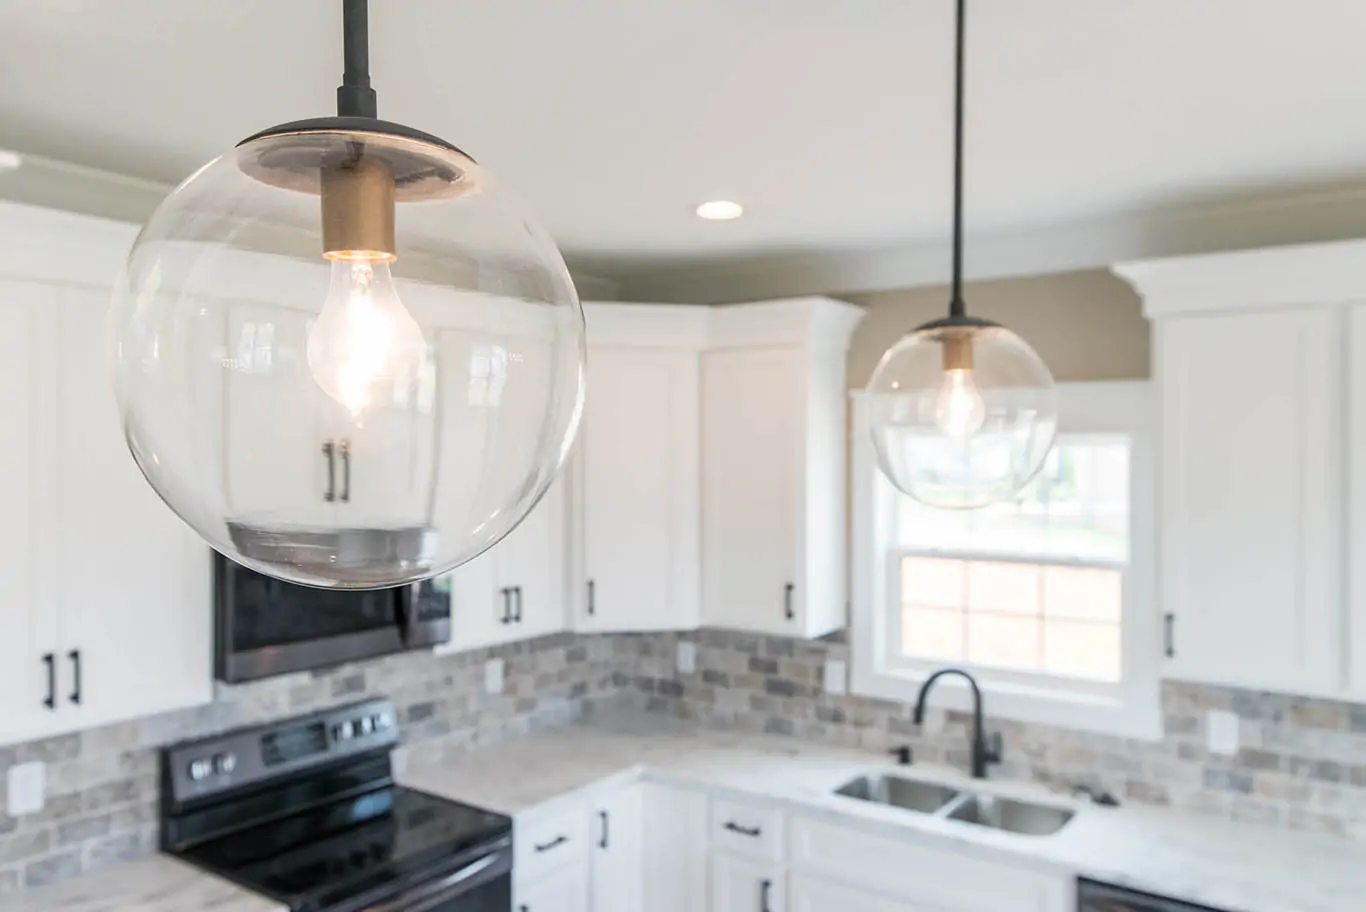 Mulberry Builders kitchen remodel with old-fashioned round glass hanging lamps.